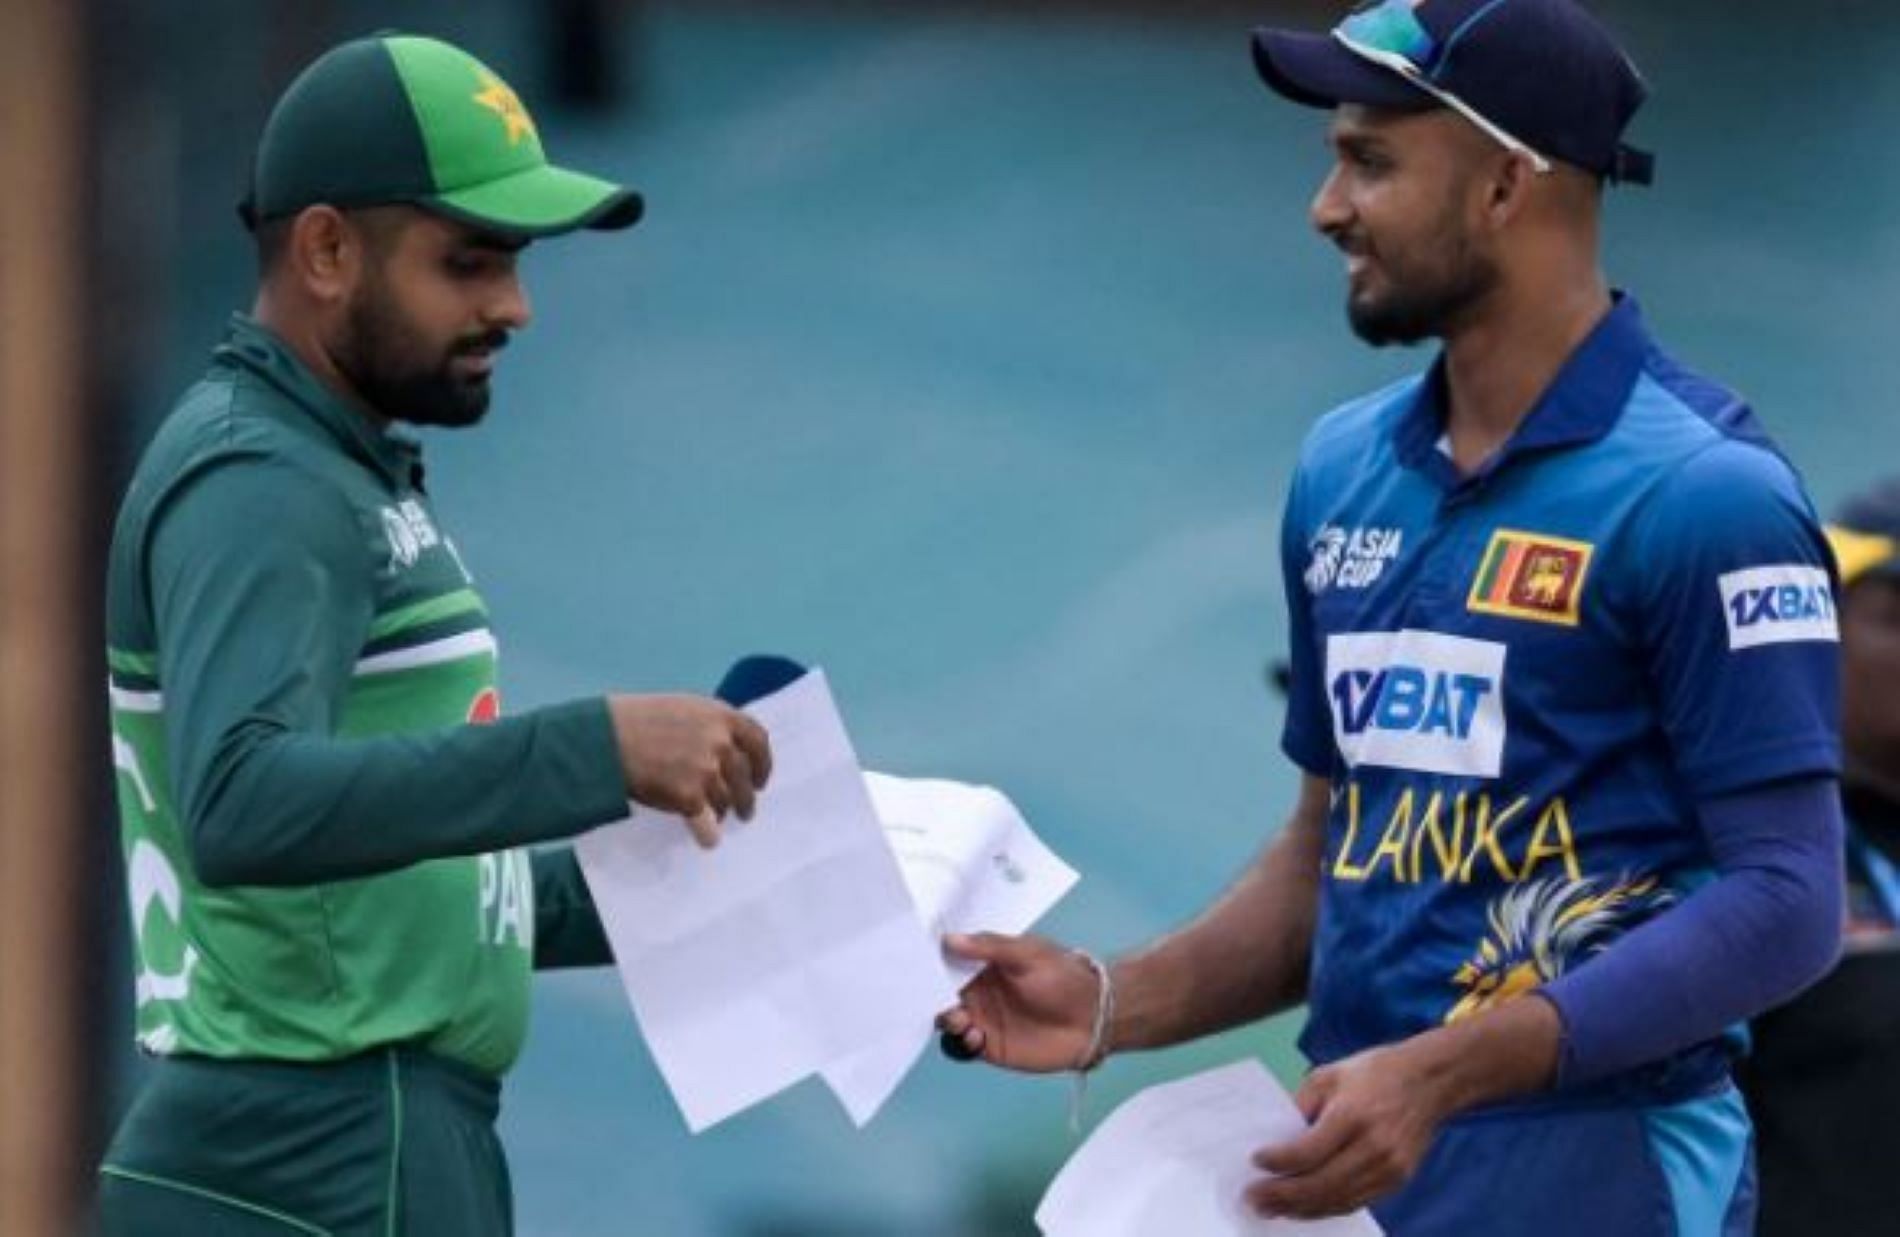 The captains will look to put their best foot forward to qualify for the Asia Cup final.